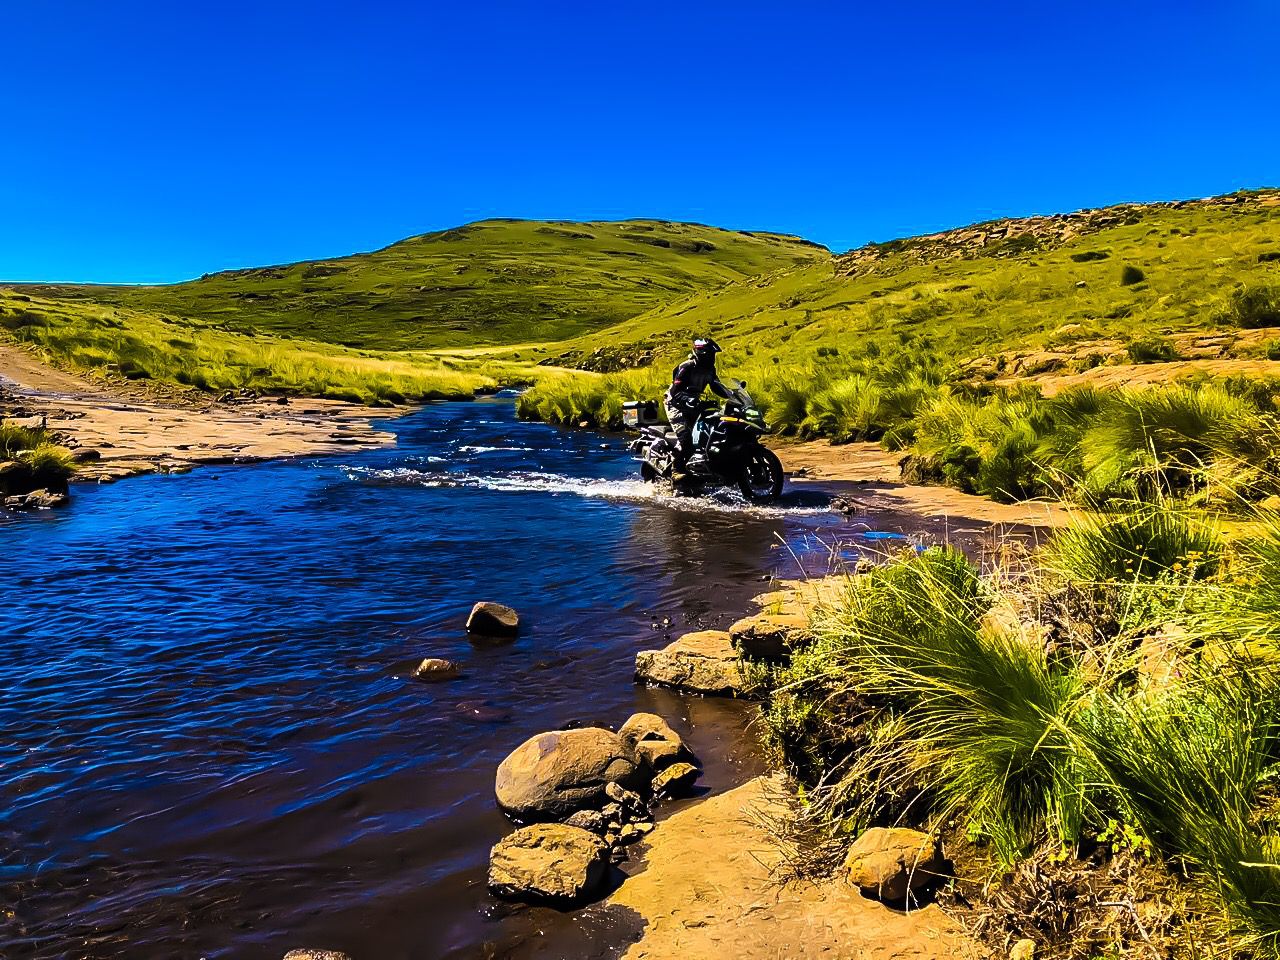 Water crossing along the contour line between South Africa & Lesotho